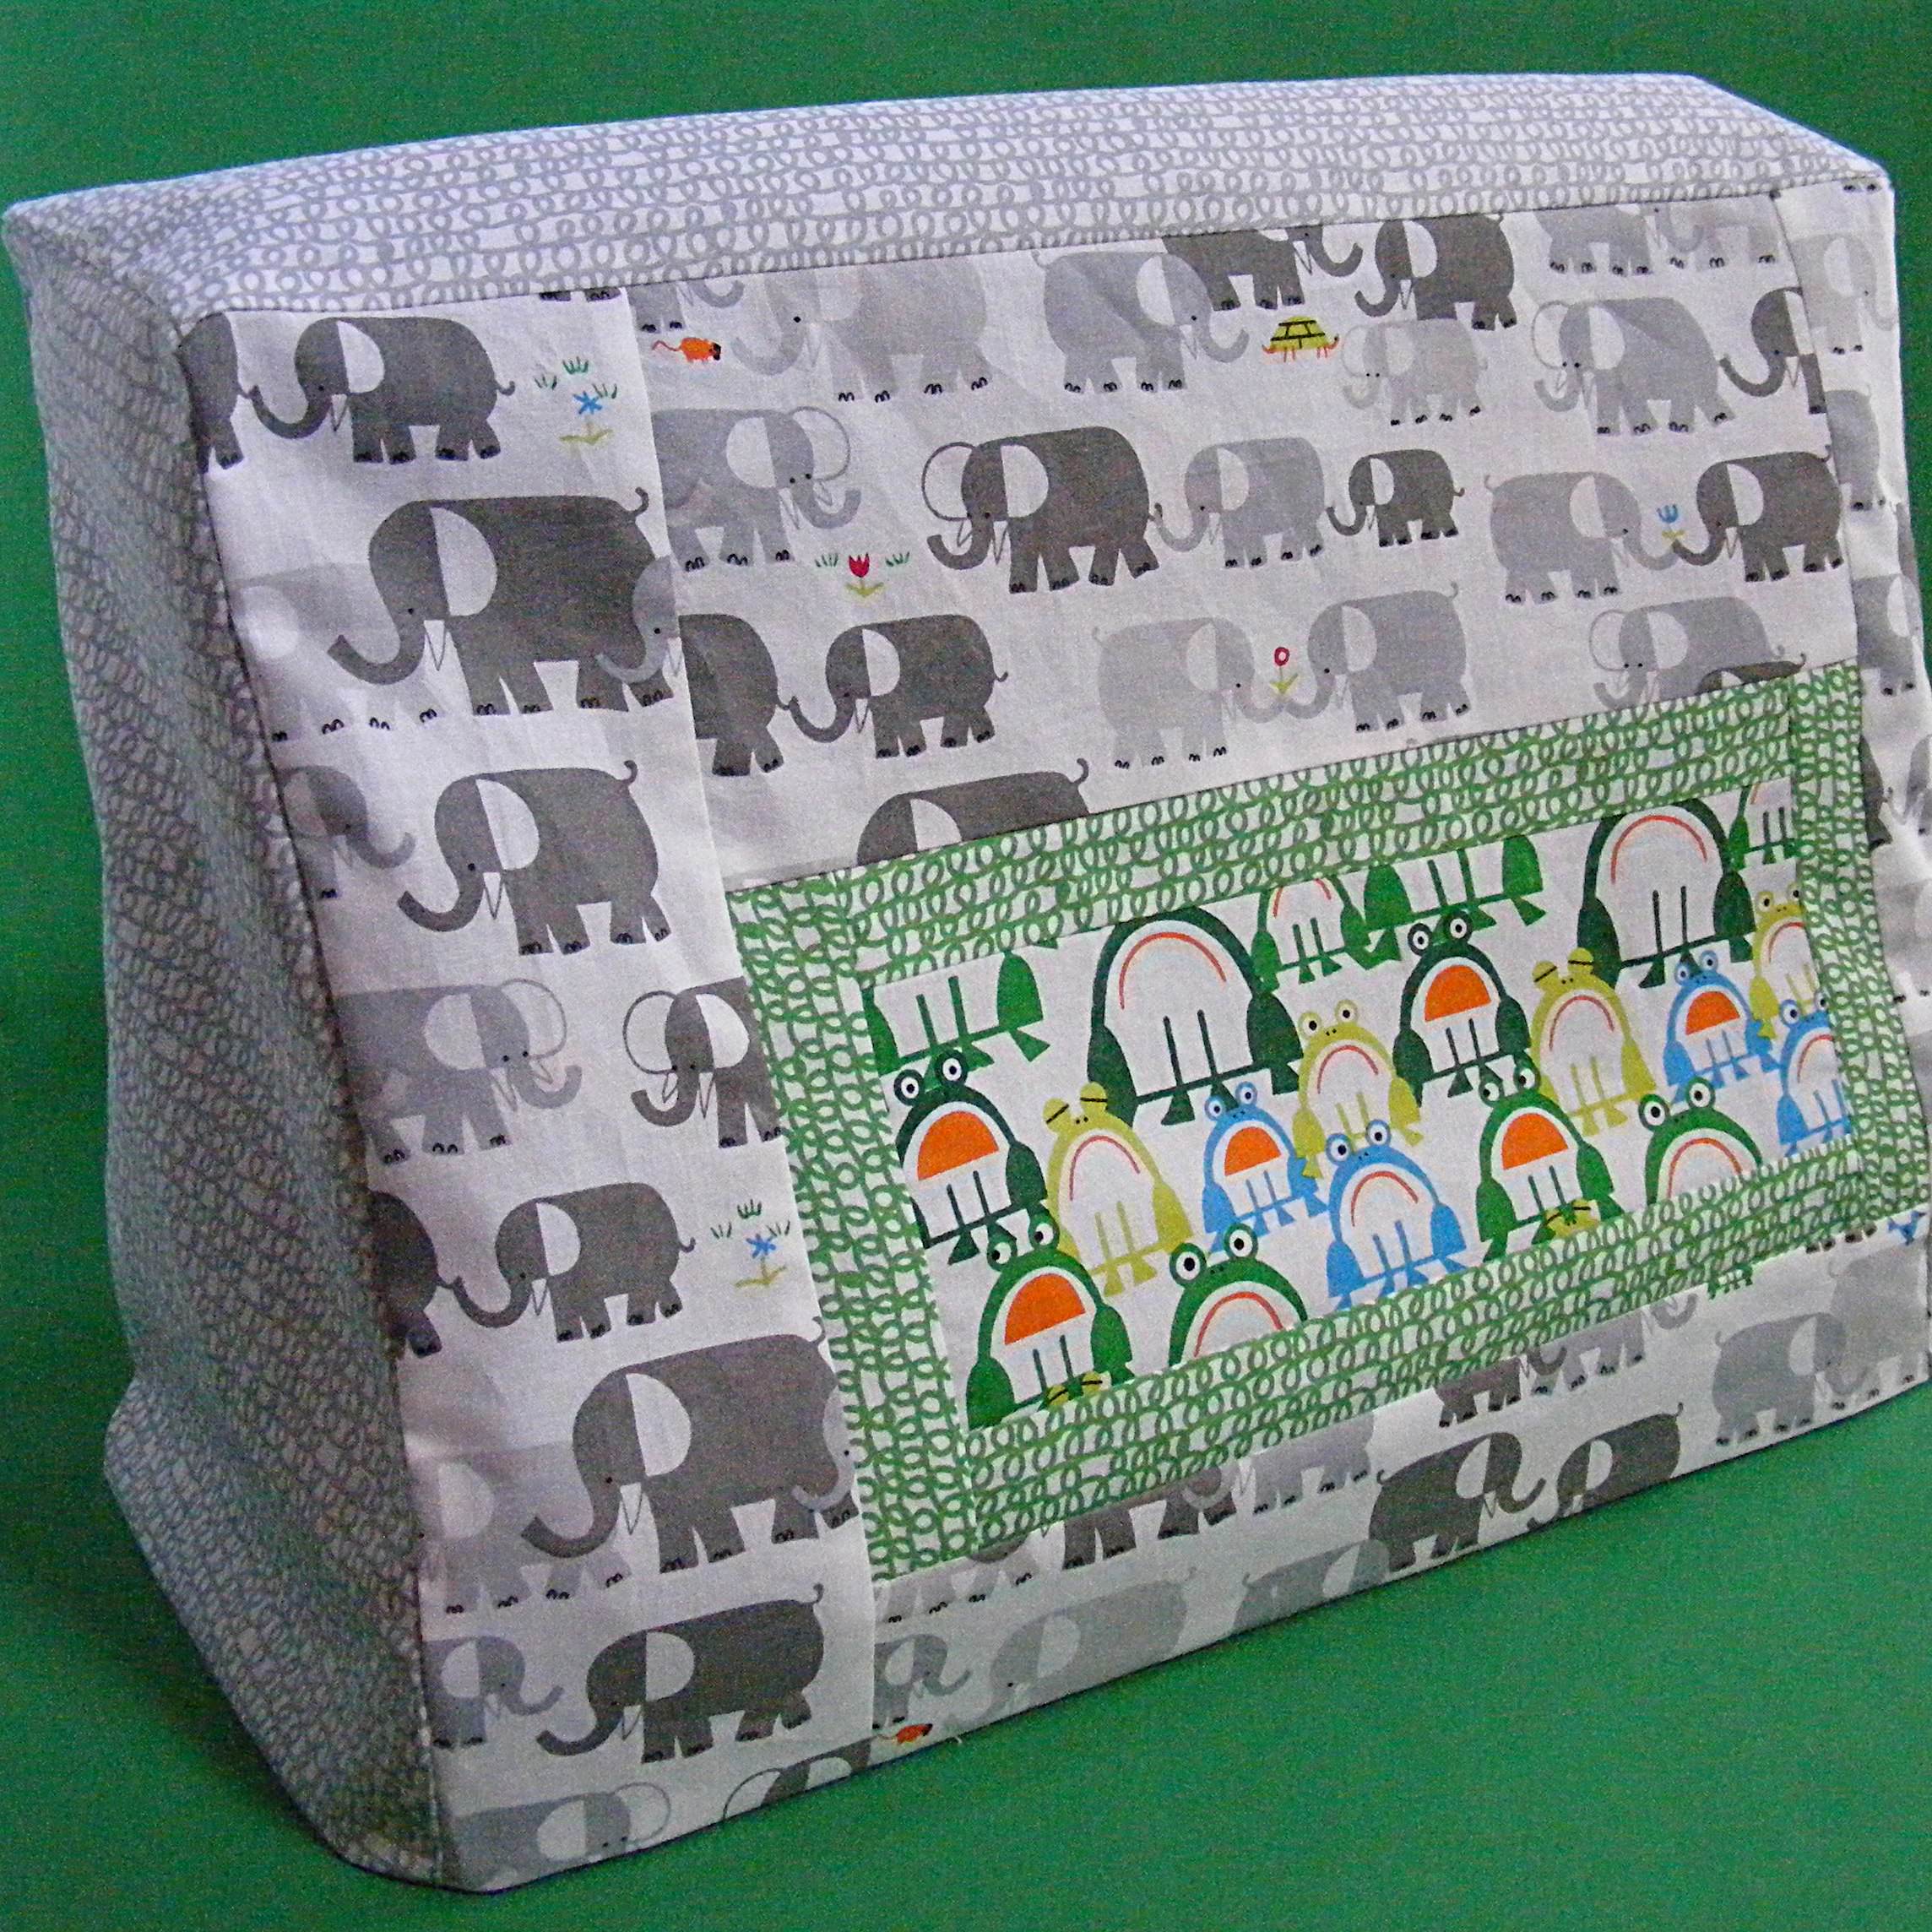 Sewing Machine Dust Cover Pattern (FREE!) – Sewing Seeds of Love